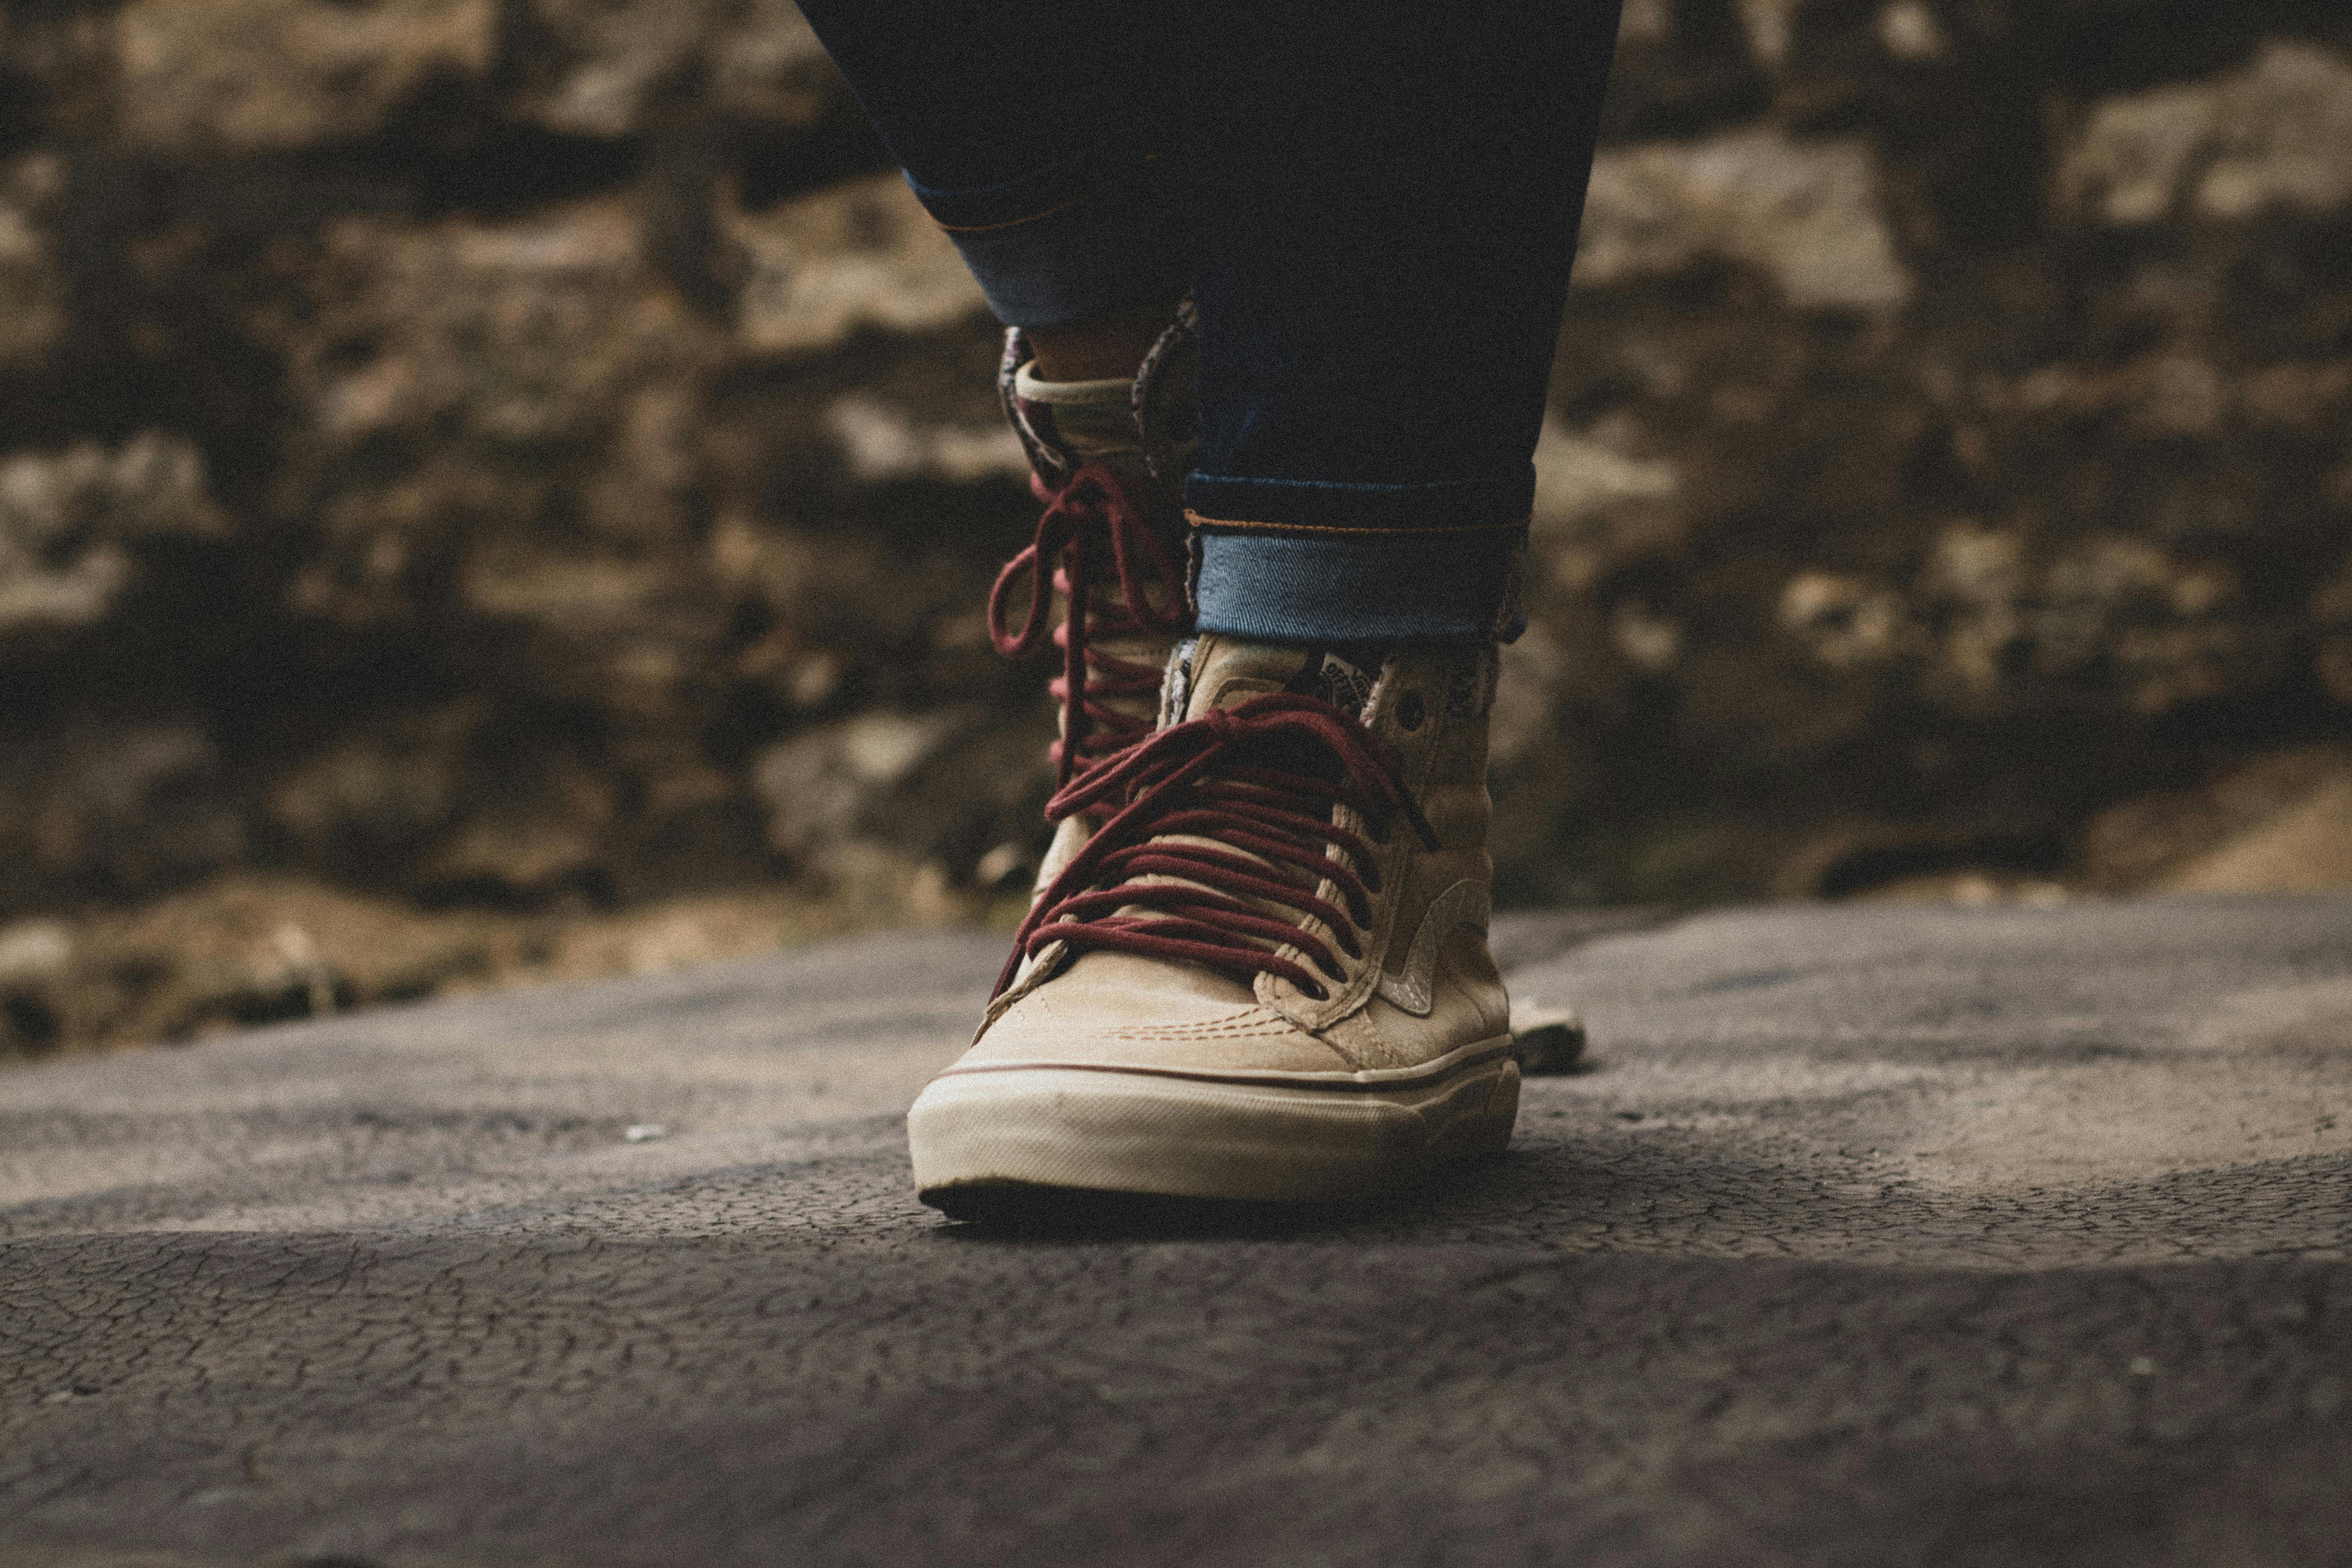 Person Walking on Road With Vans Shoes · Free Stock Photo